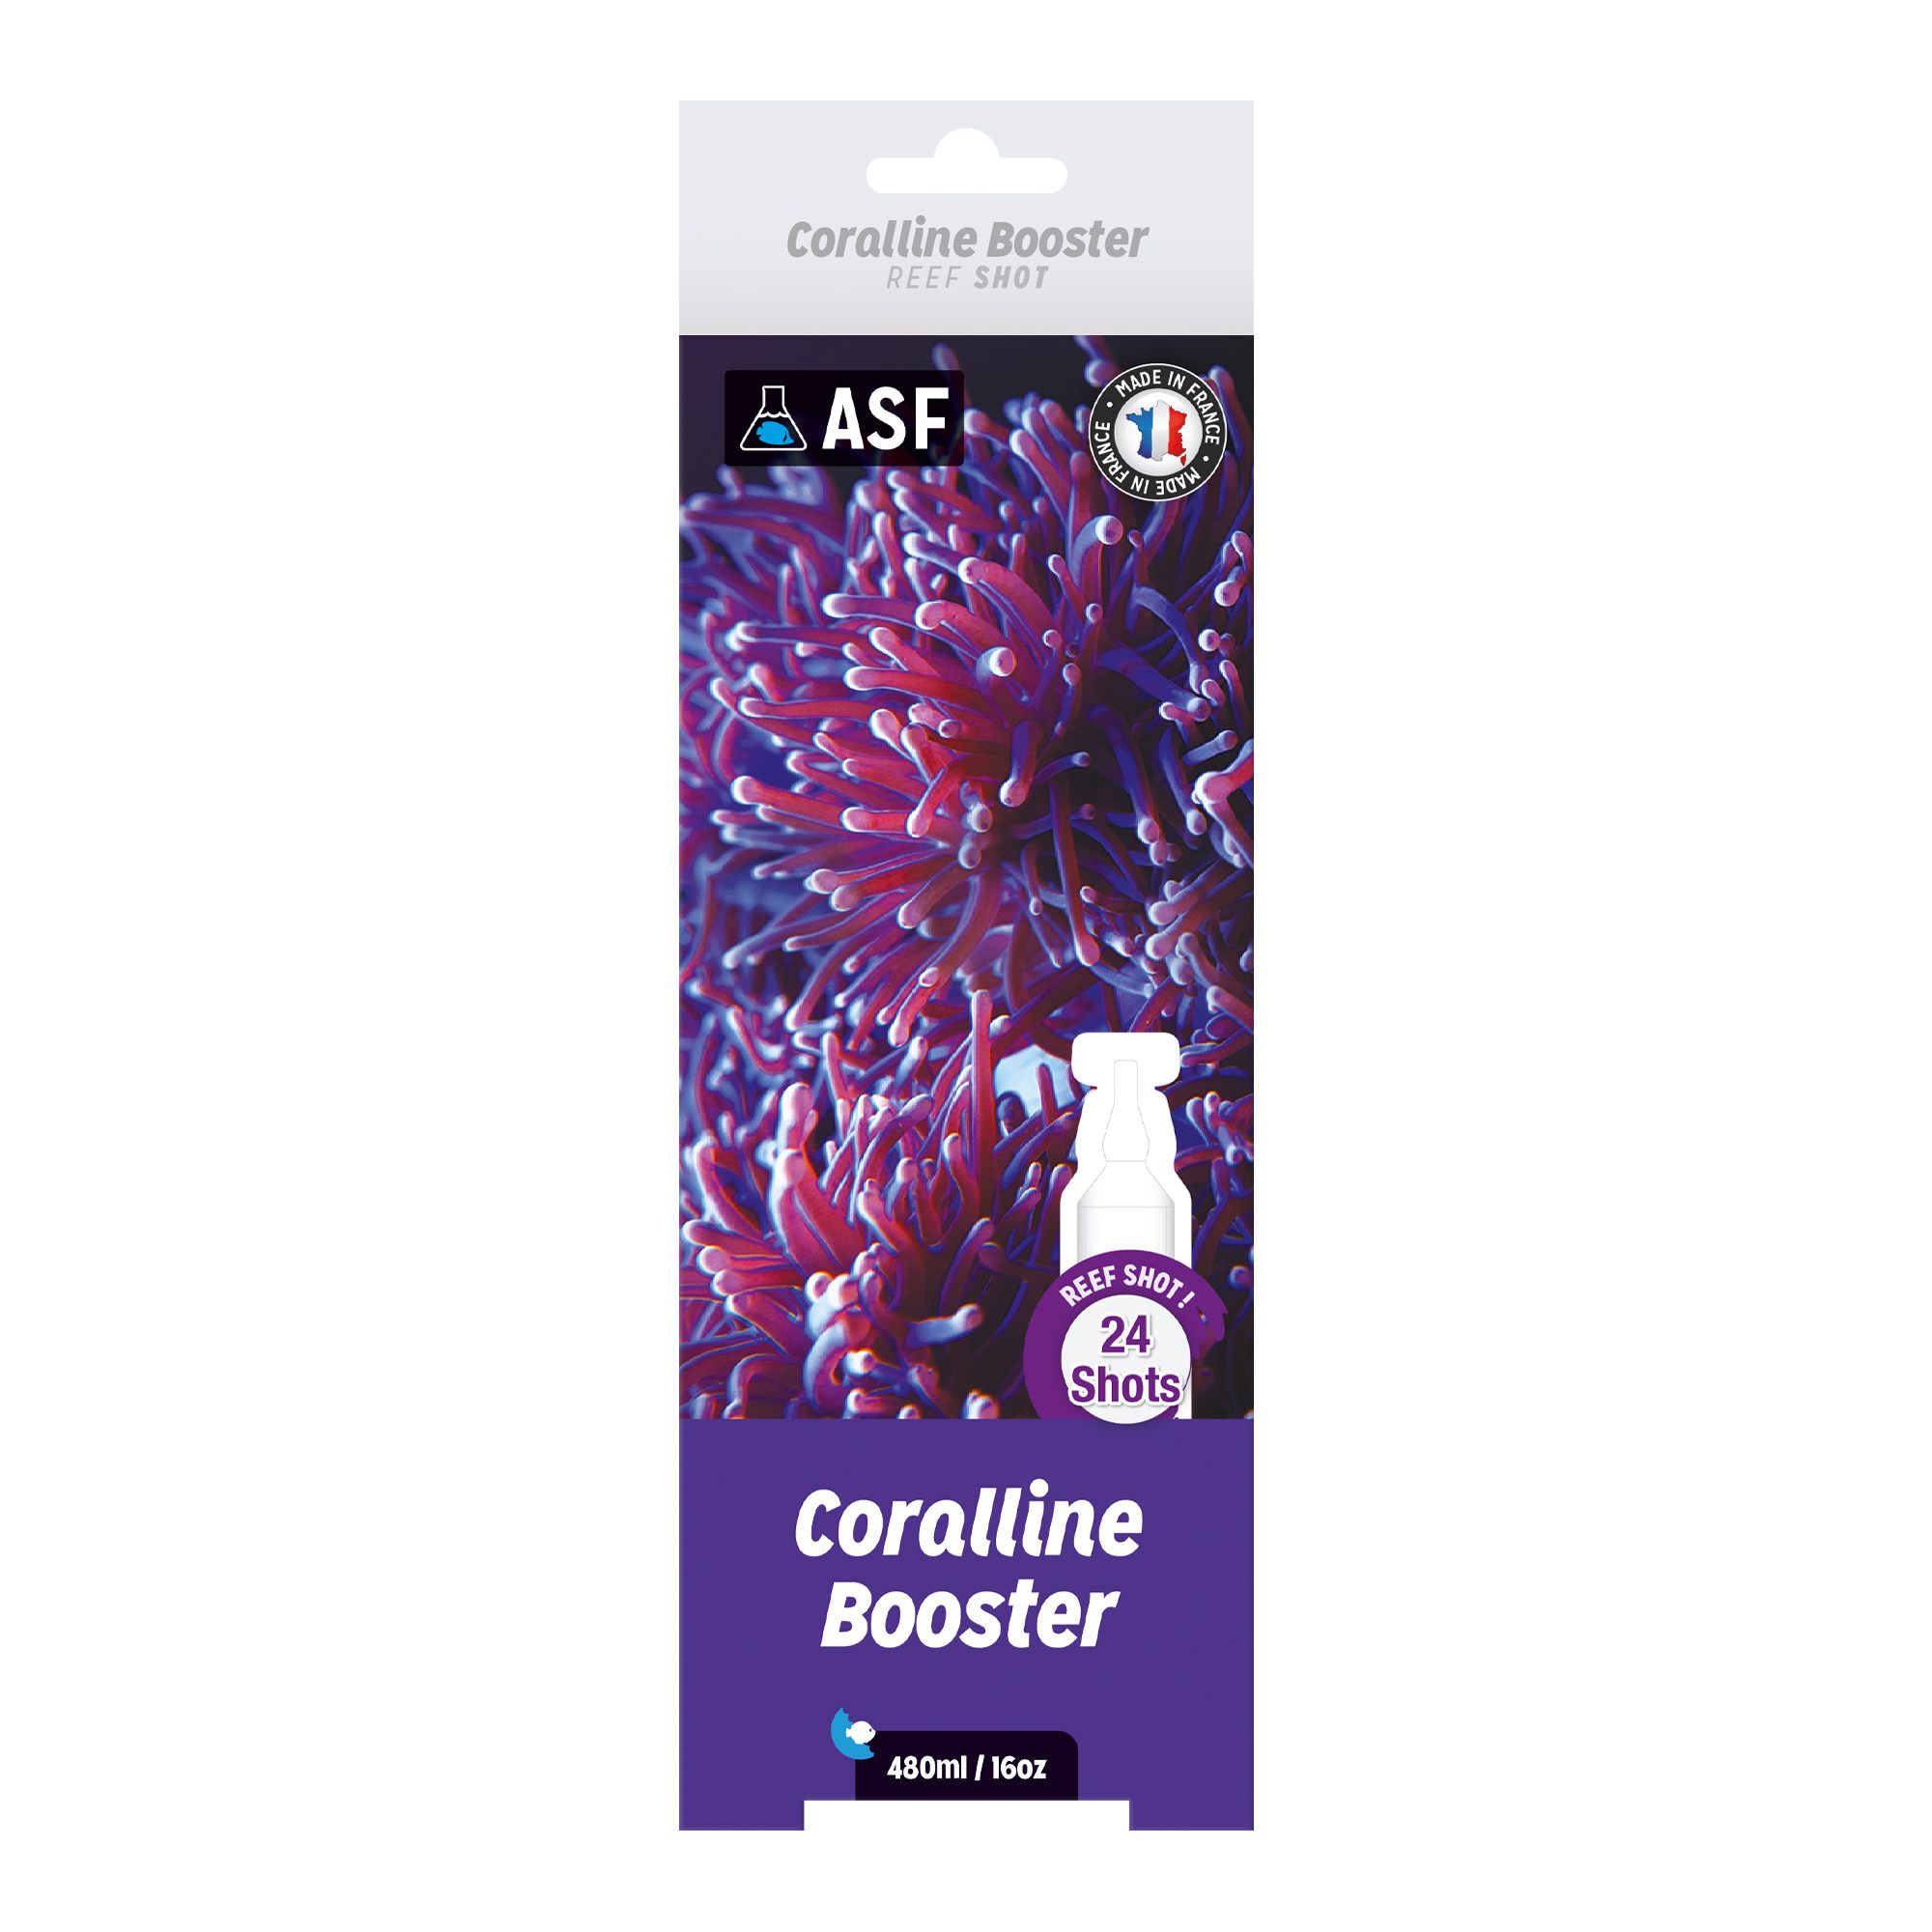 AS Coralline Booster Reef Shots 24 pack 480ml